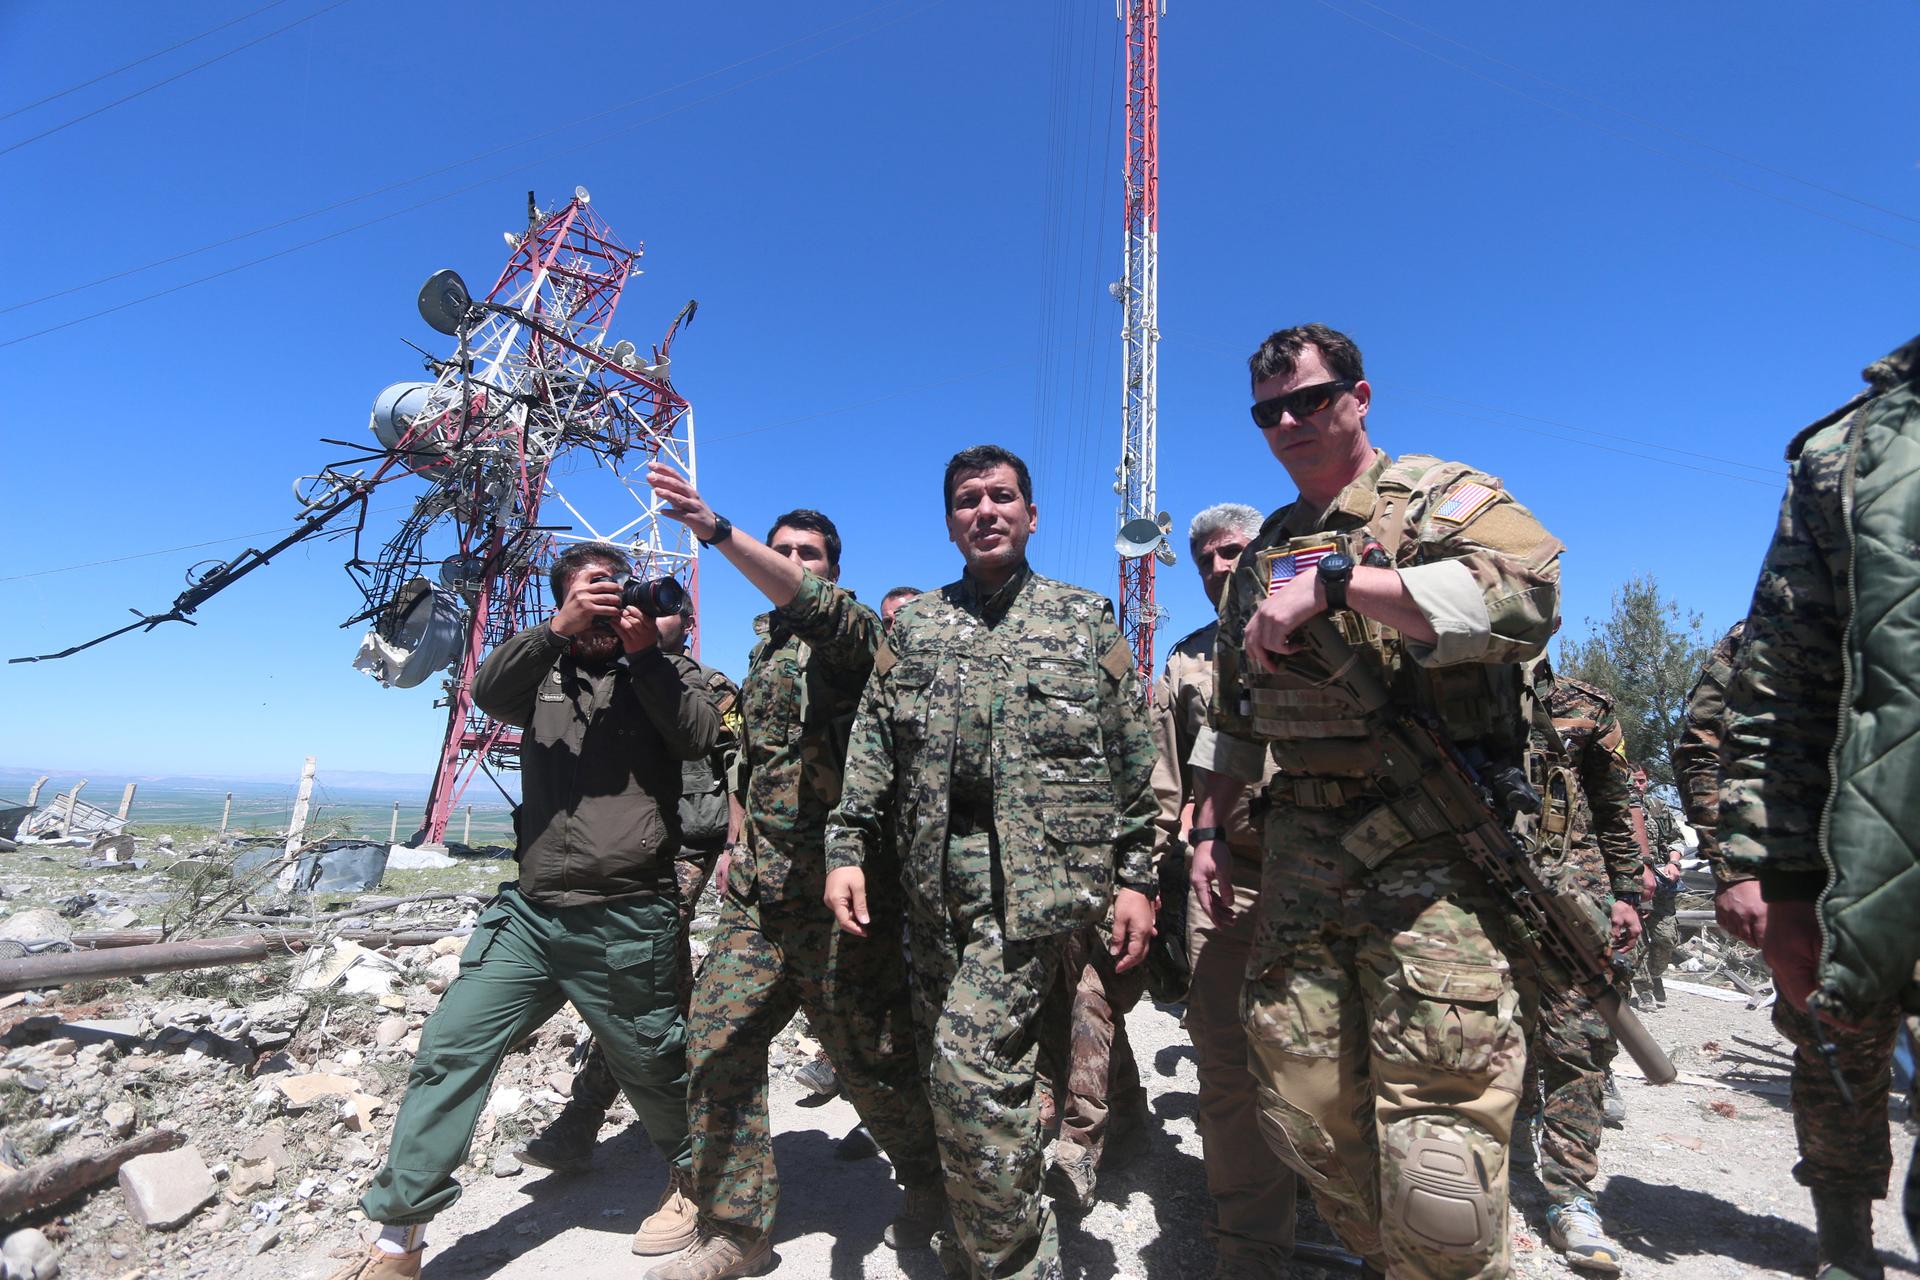 A US military commander, right, walks with a commander from the Kurdish People's Protection Units